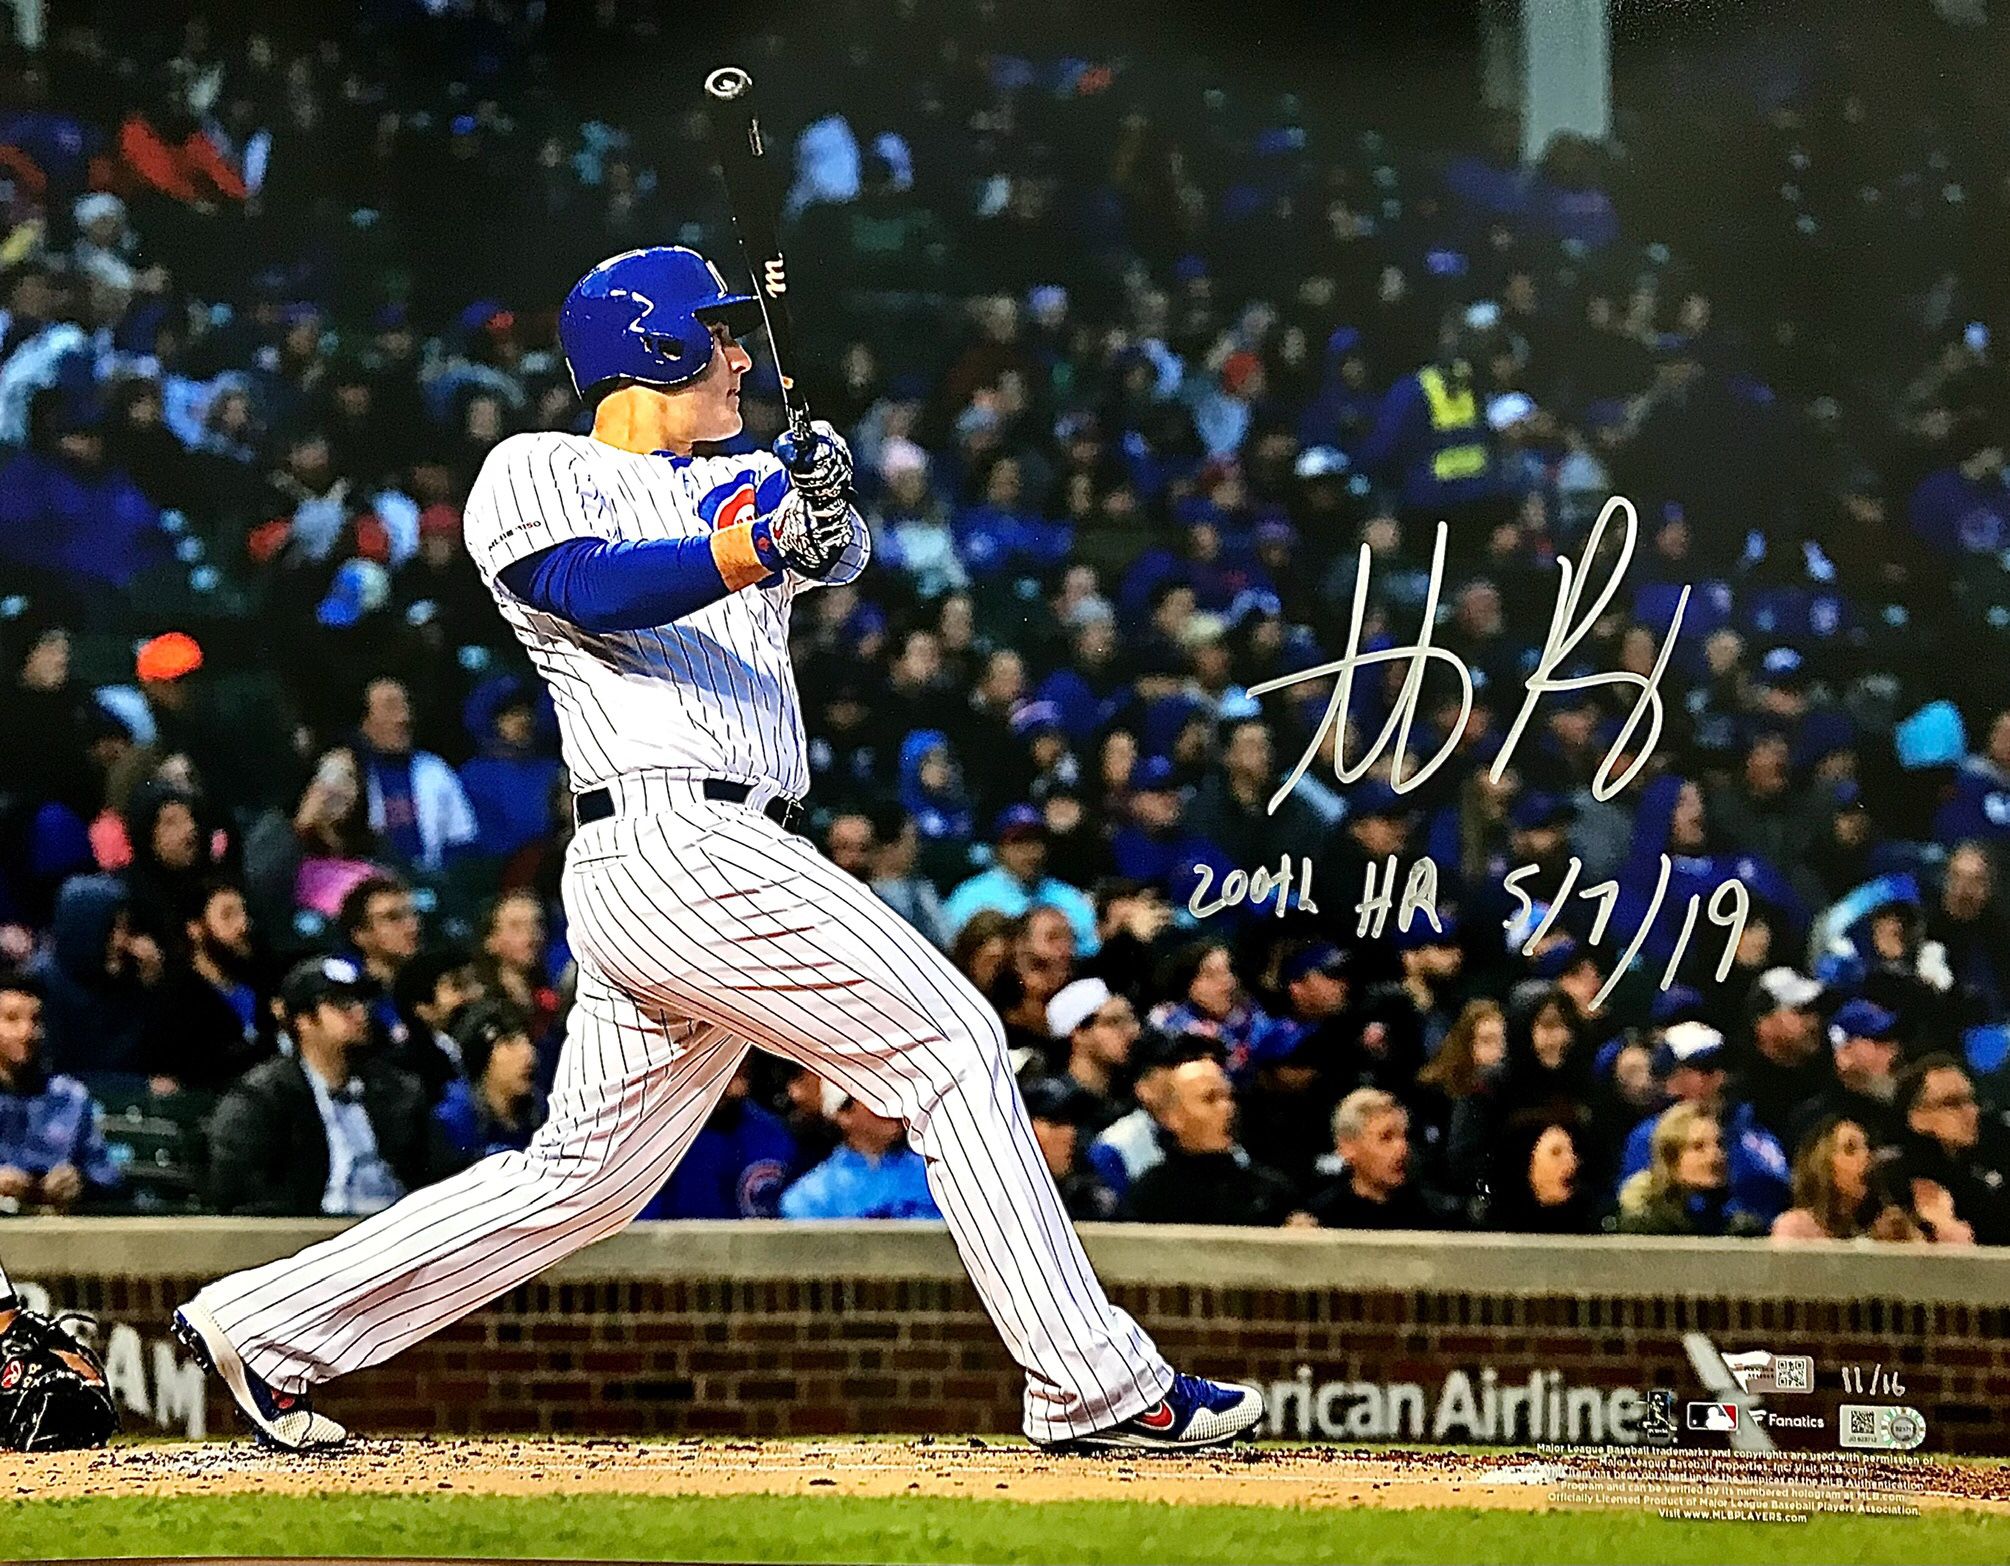 Anthony Rizzo Chicago Cubs Signed 16x20 Photo LIMITED EDITION 11/16 Inscribed “200th HR 5/7/19” - 2016 World Series Champion Autograph —MLB + Fanatics